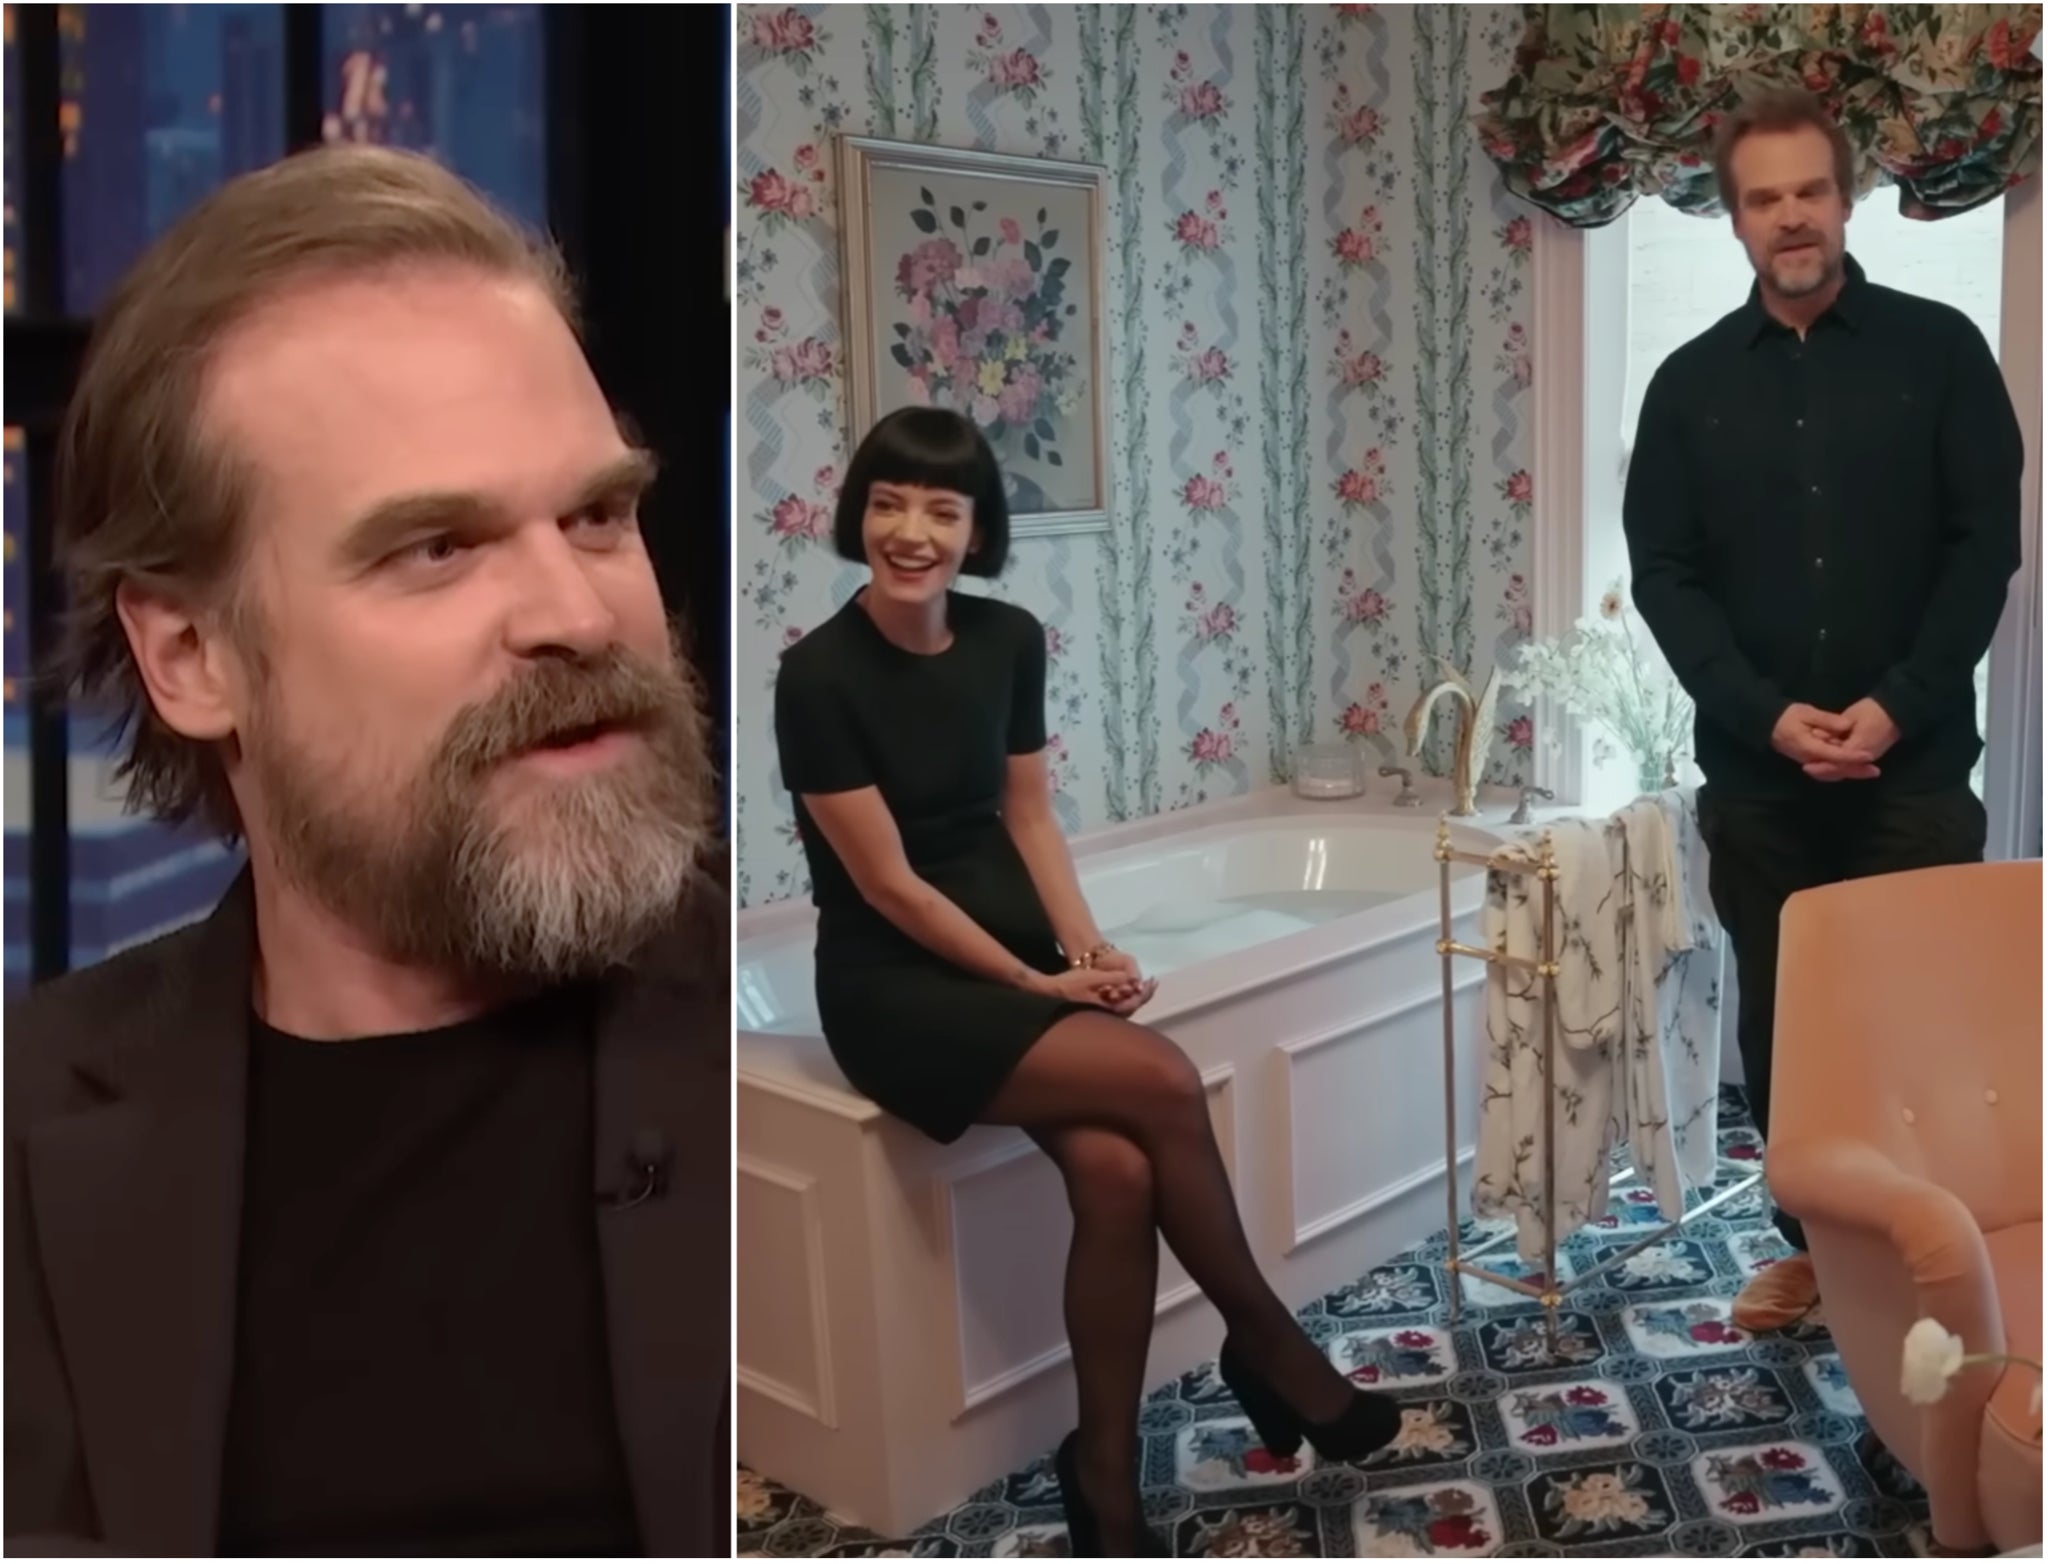 David Harbour (left) and with his wife Lily Allen (right) during their home tour for Architectural Digest